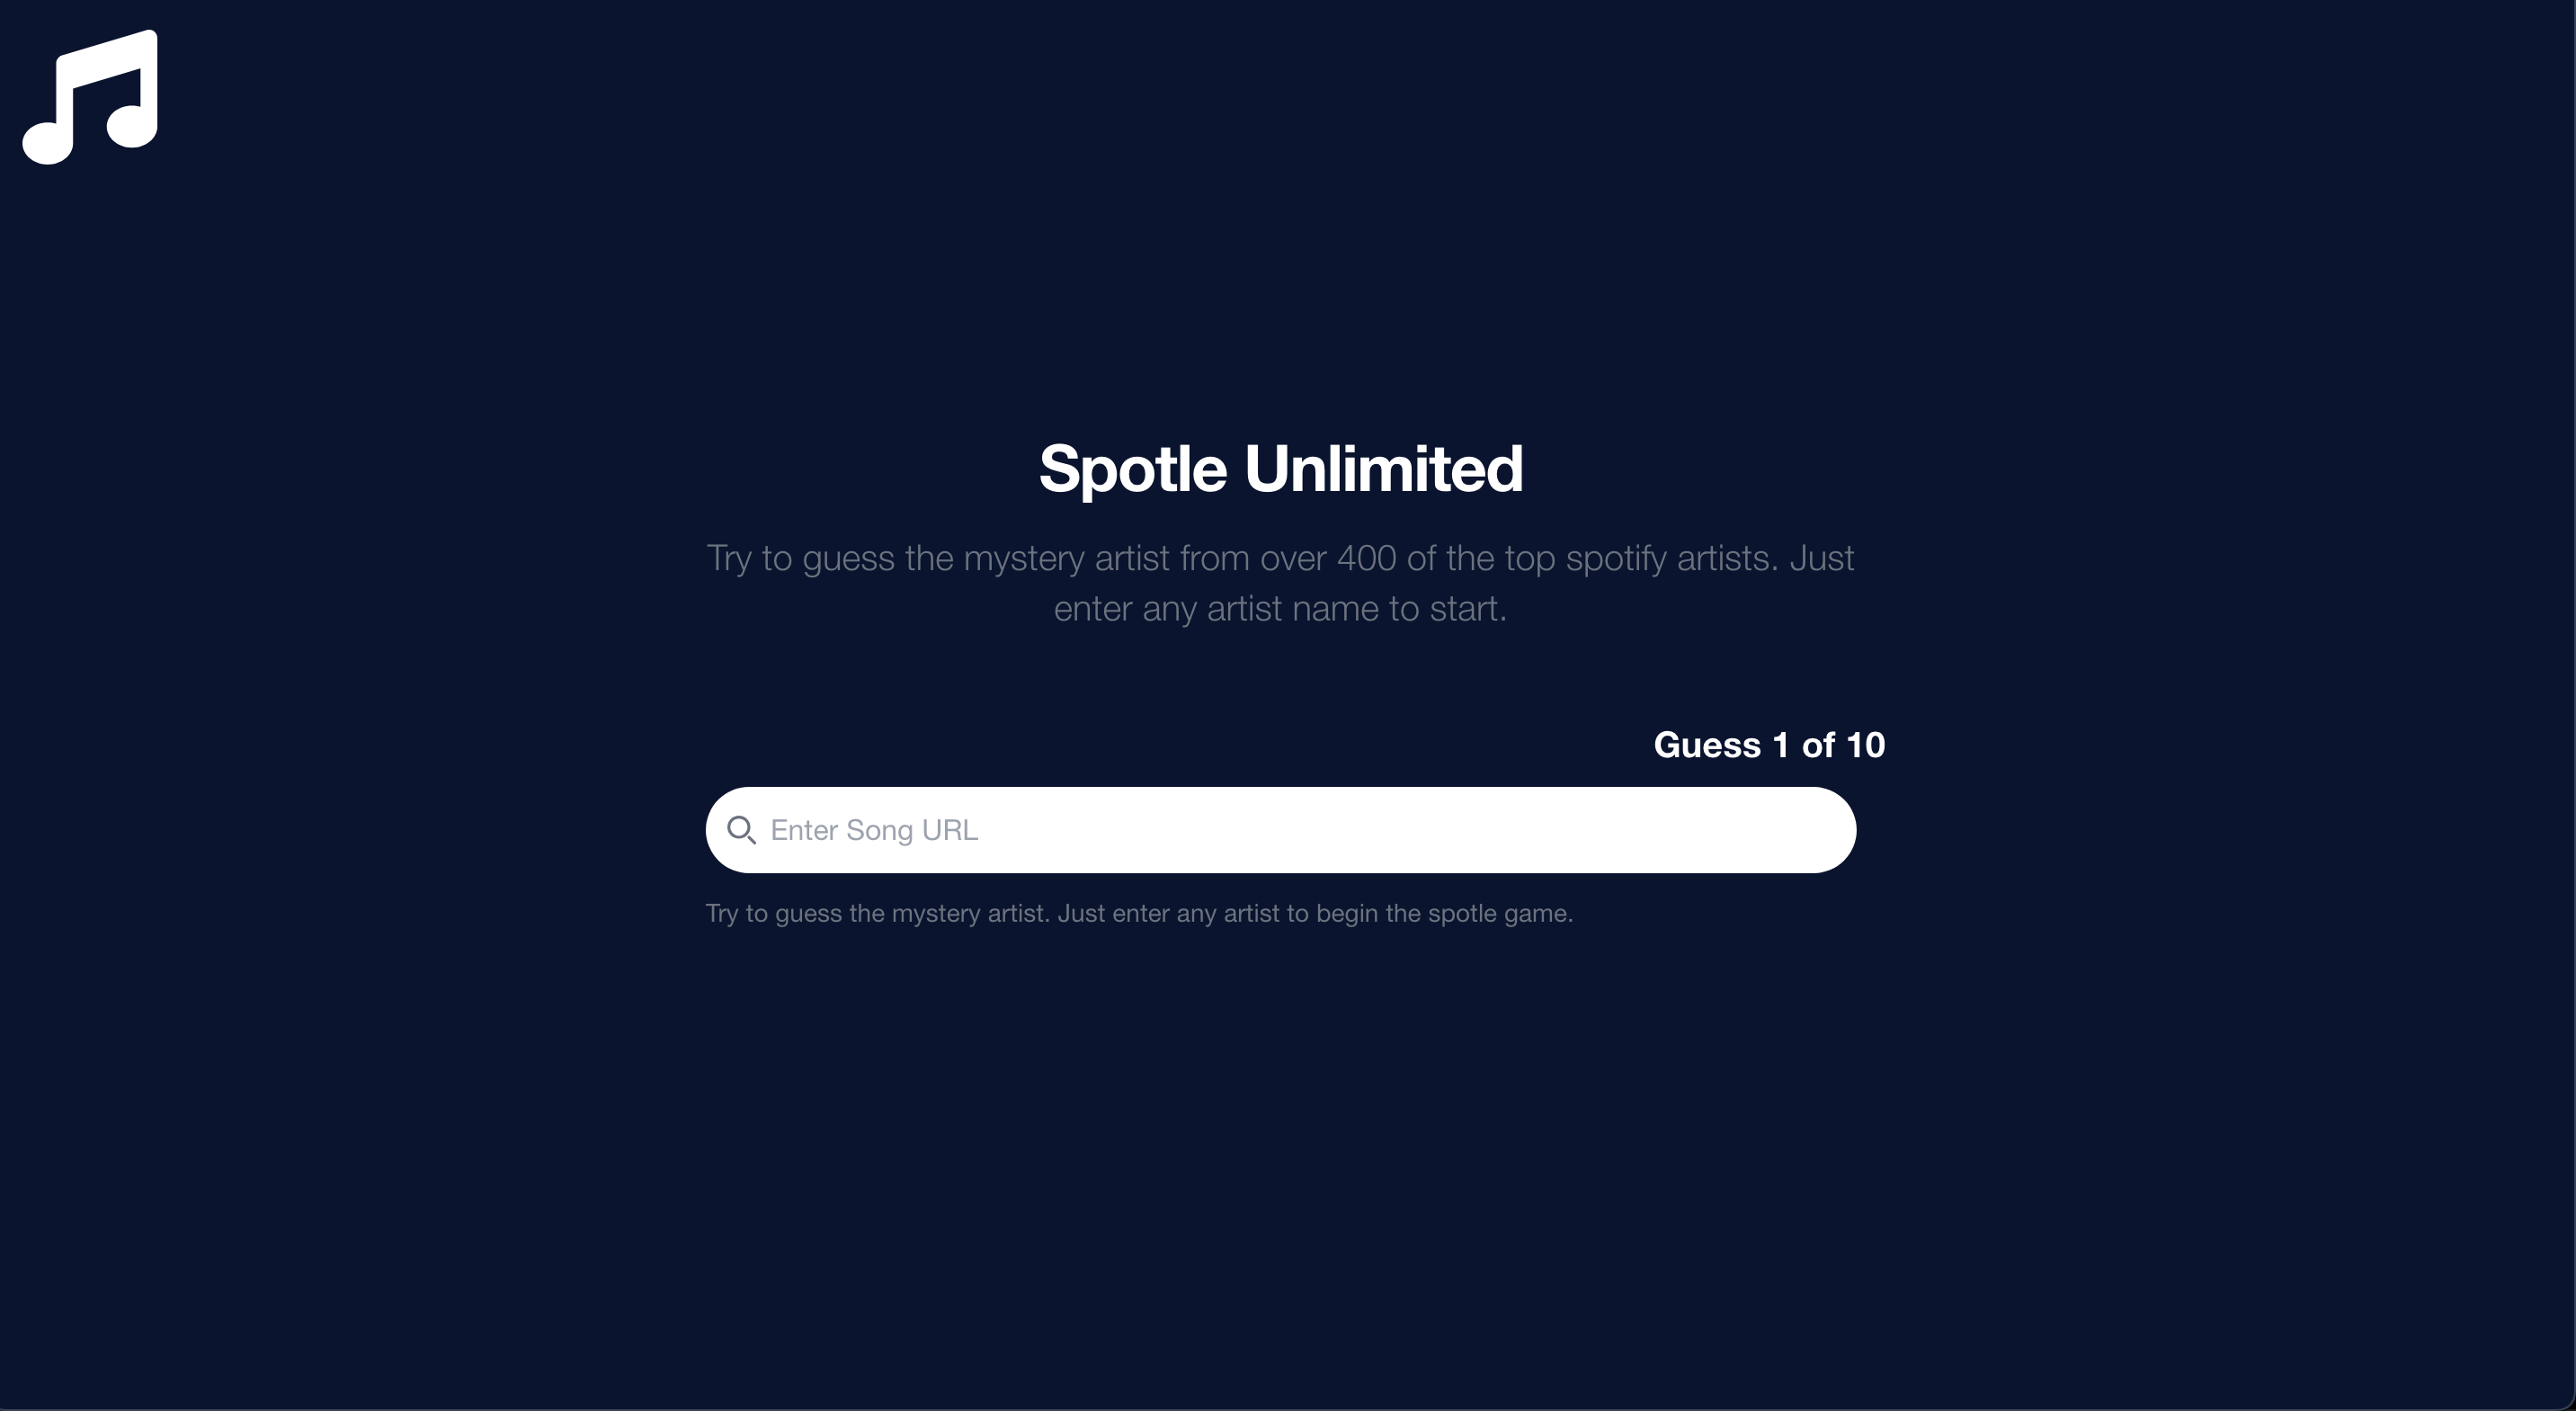 startuptile Spotle-Unlimited Spotify artist guessing game